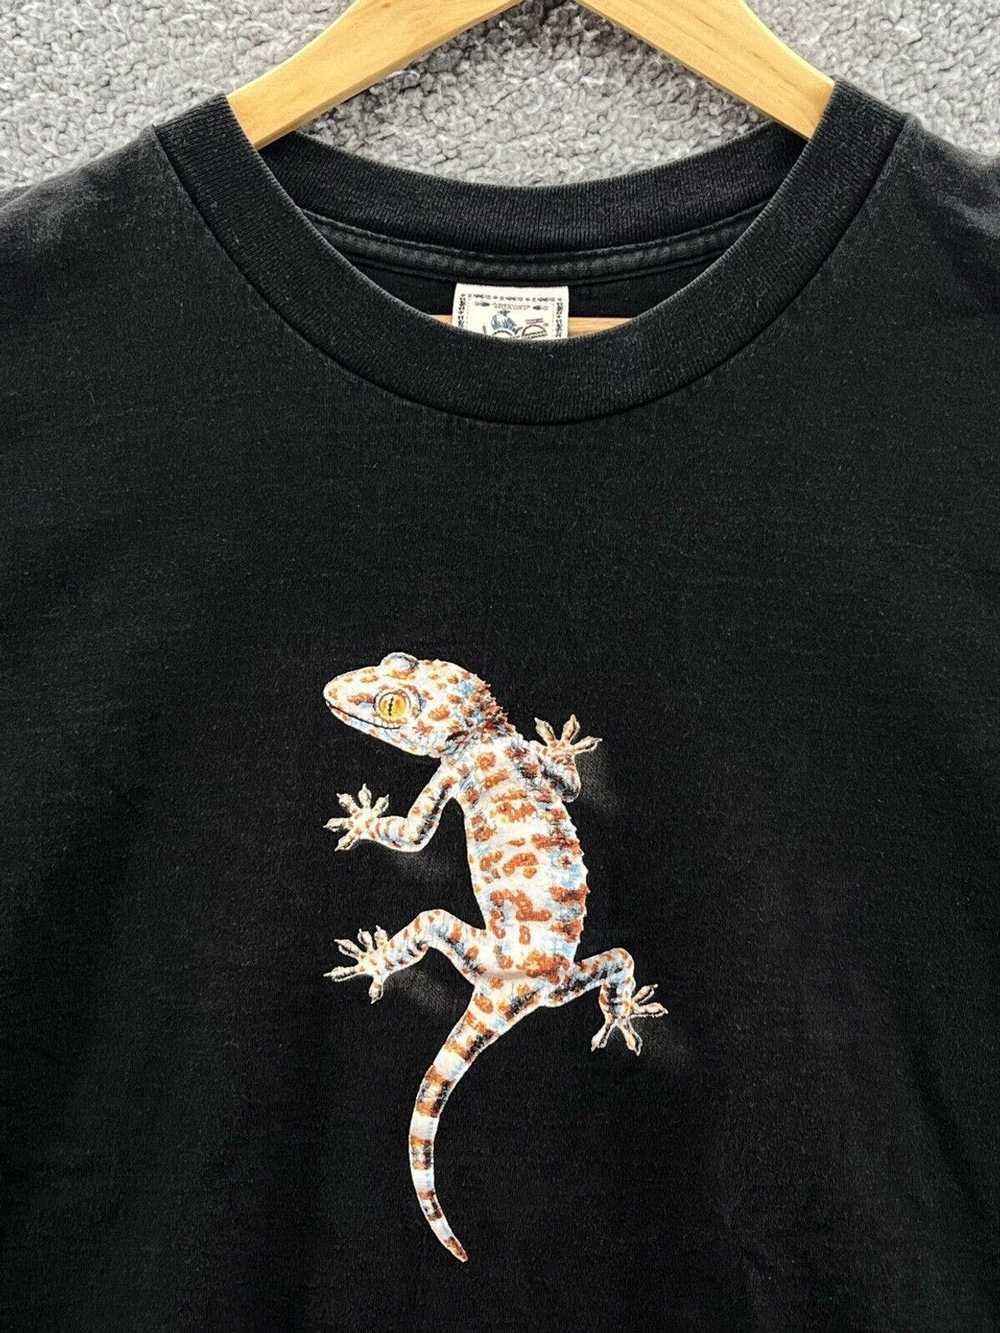 Other Alore Made In USA Black Gecko Vintage T-Shi… - image 4